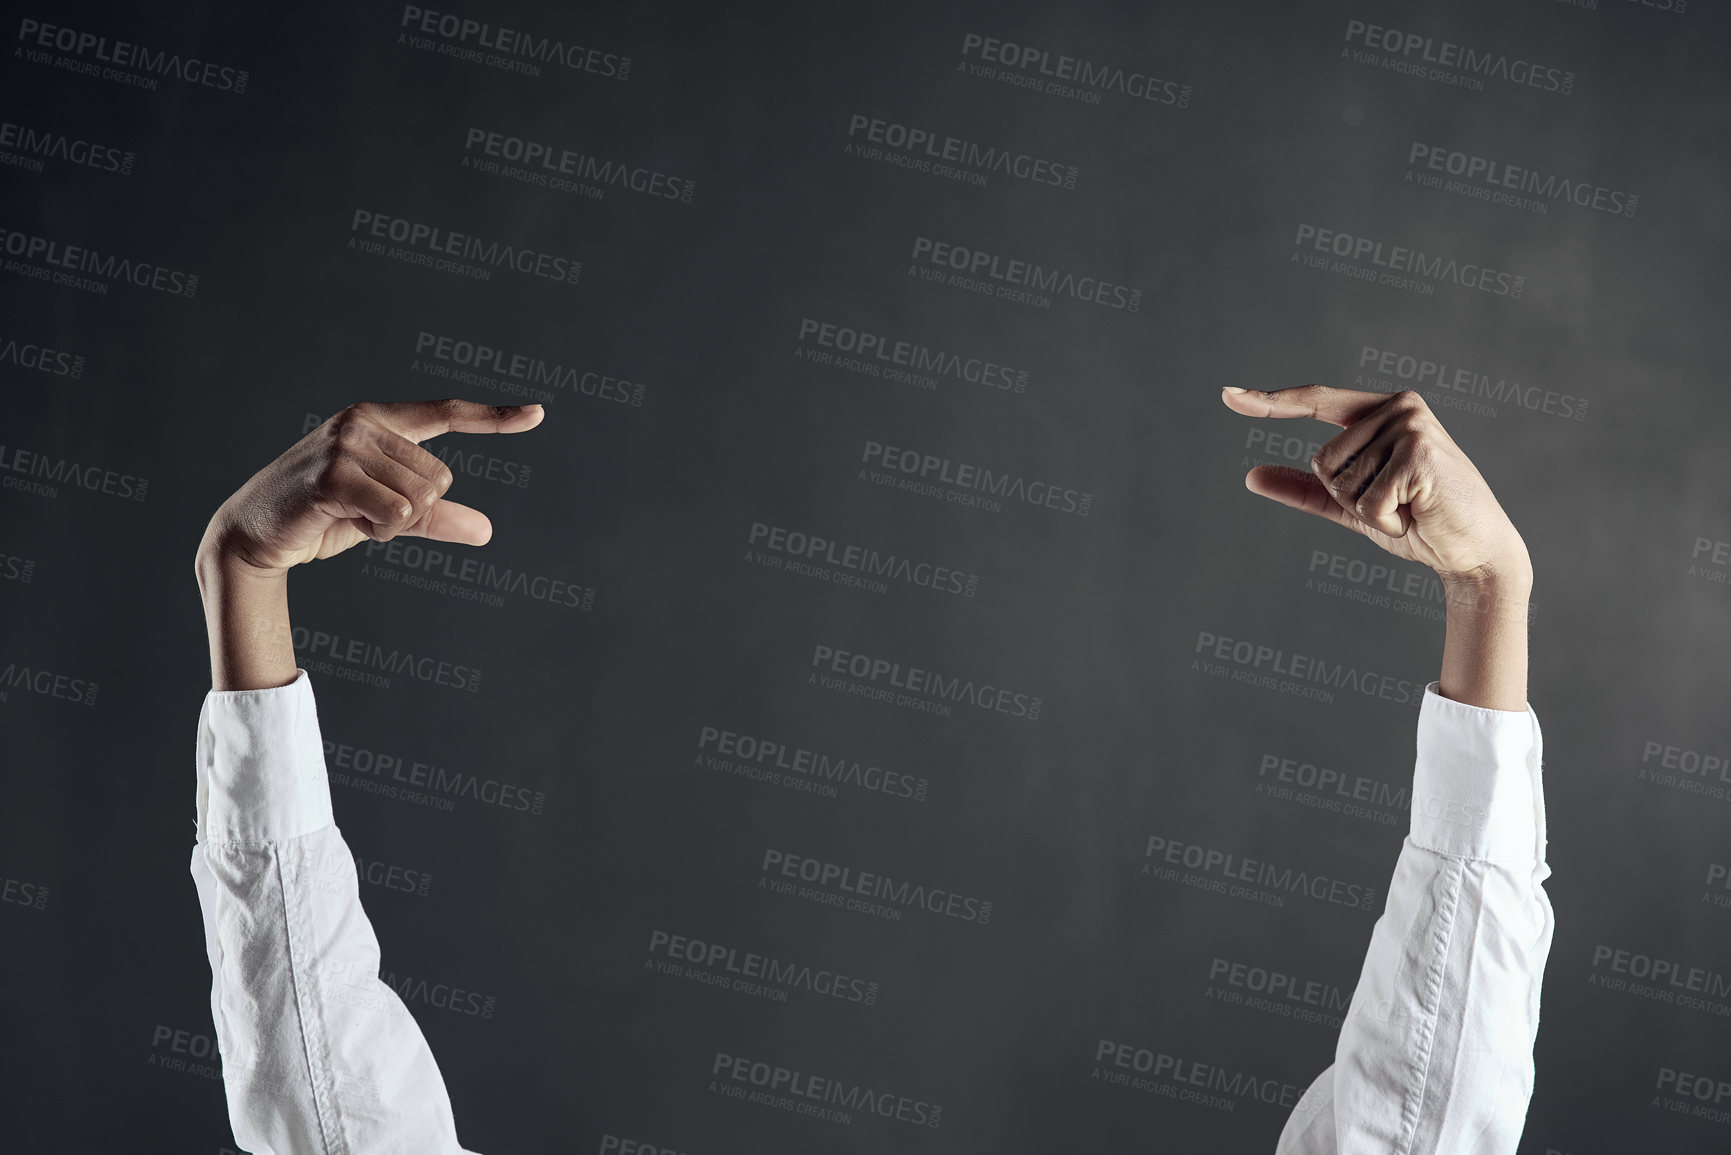 Buy stock photo Shot of hands pointing to each other against a dark background